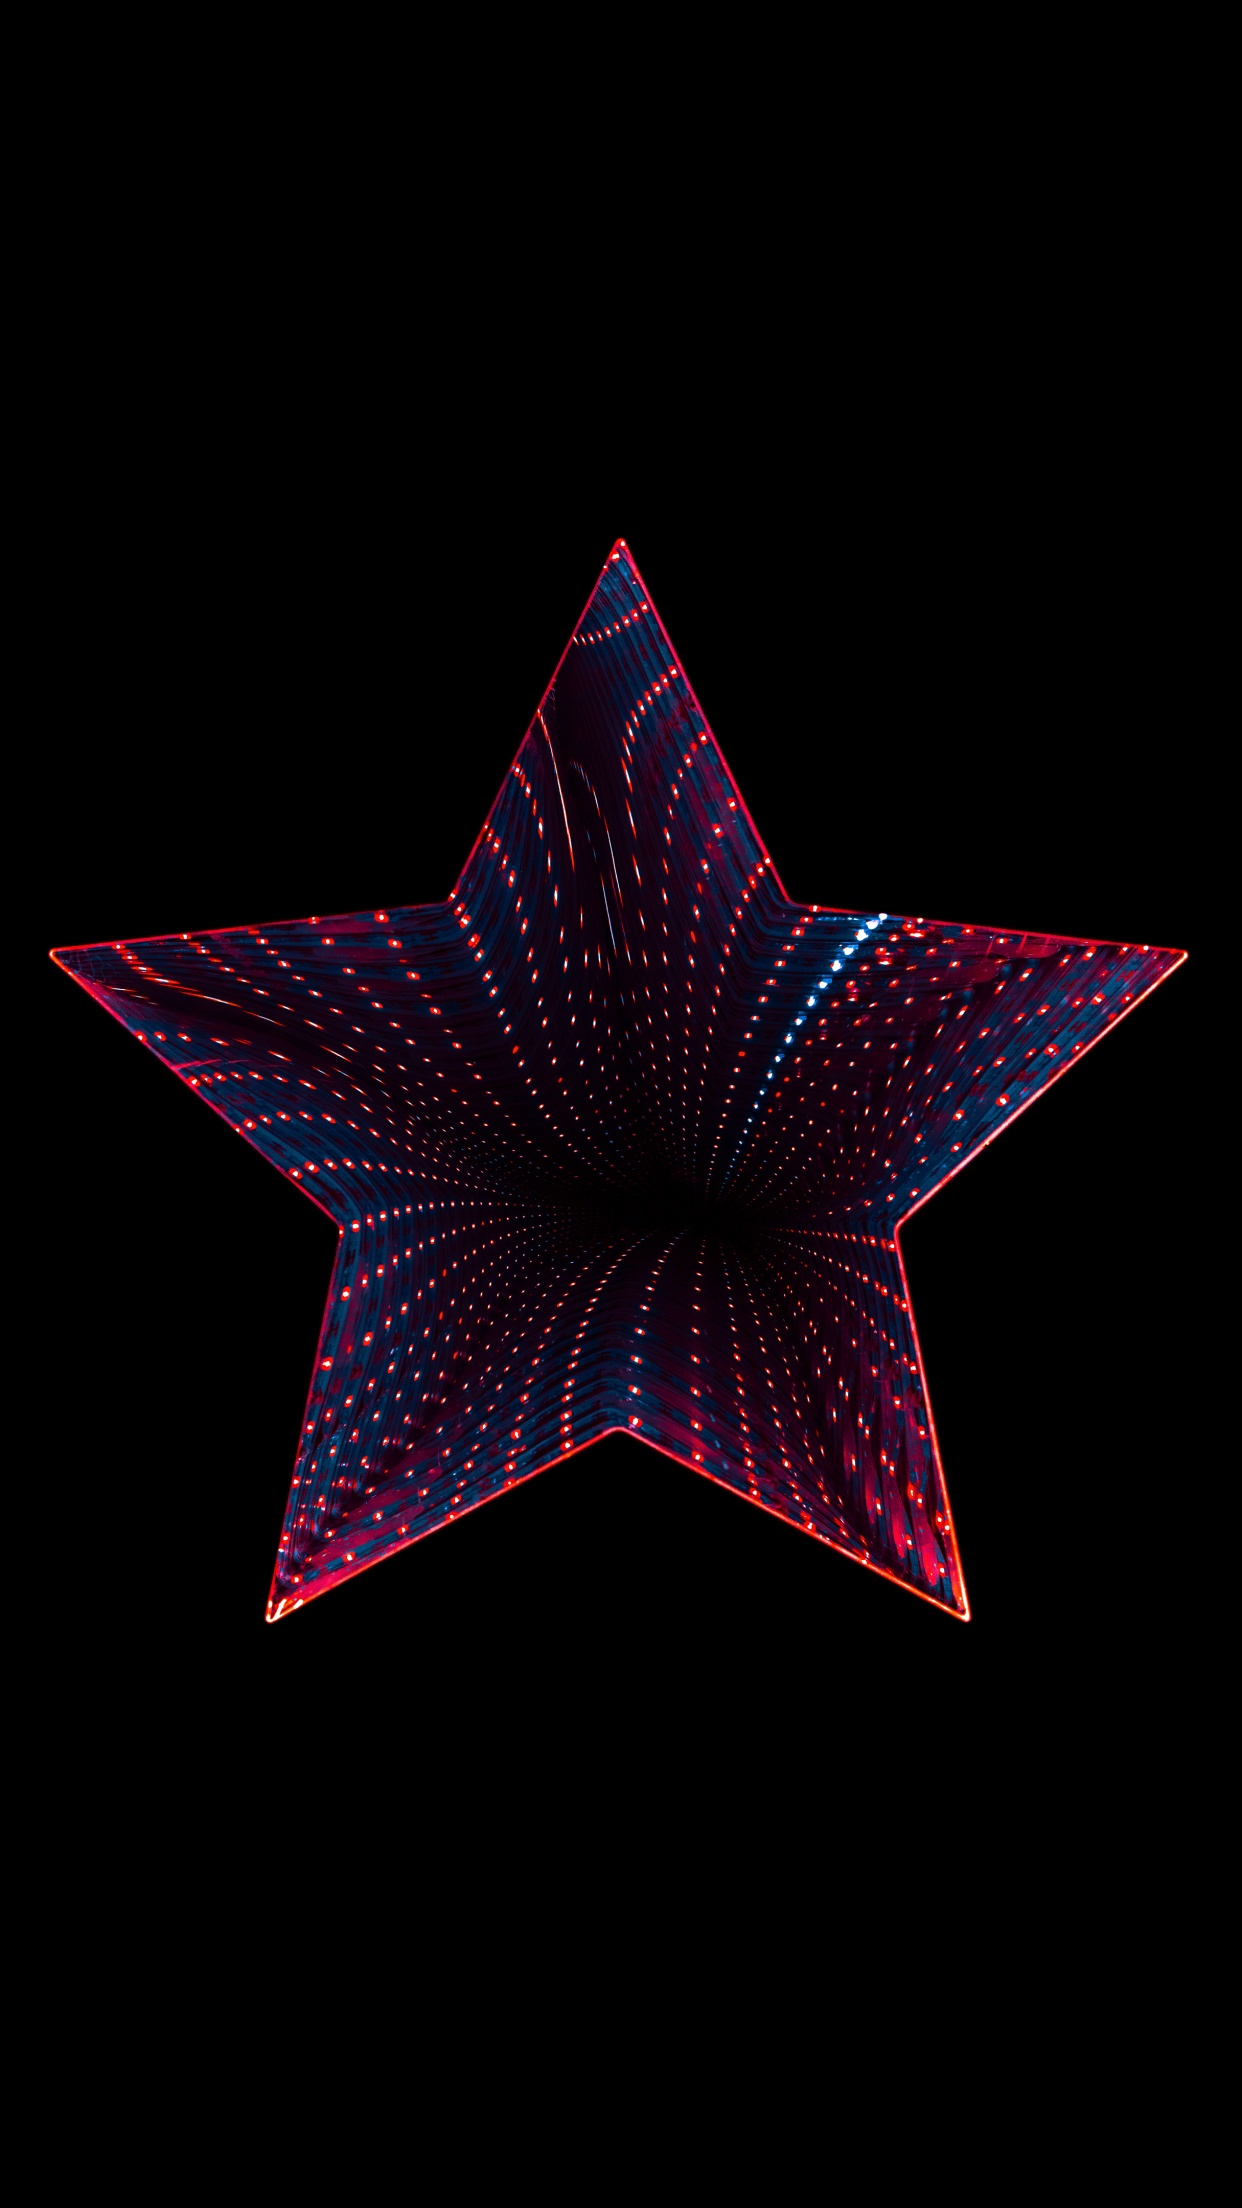 Star Wallpaper 4K, Neon, Black background, Abstract, #1508